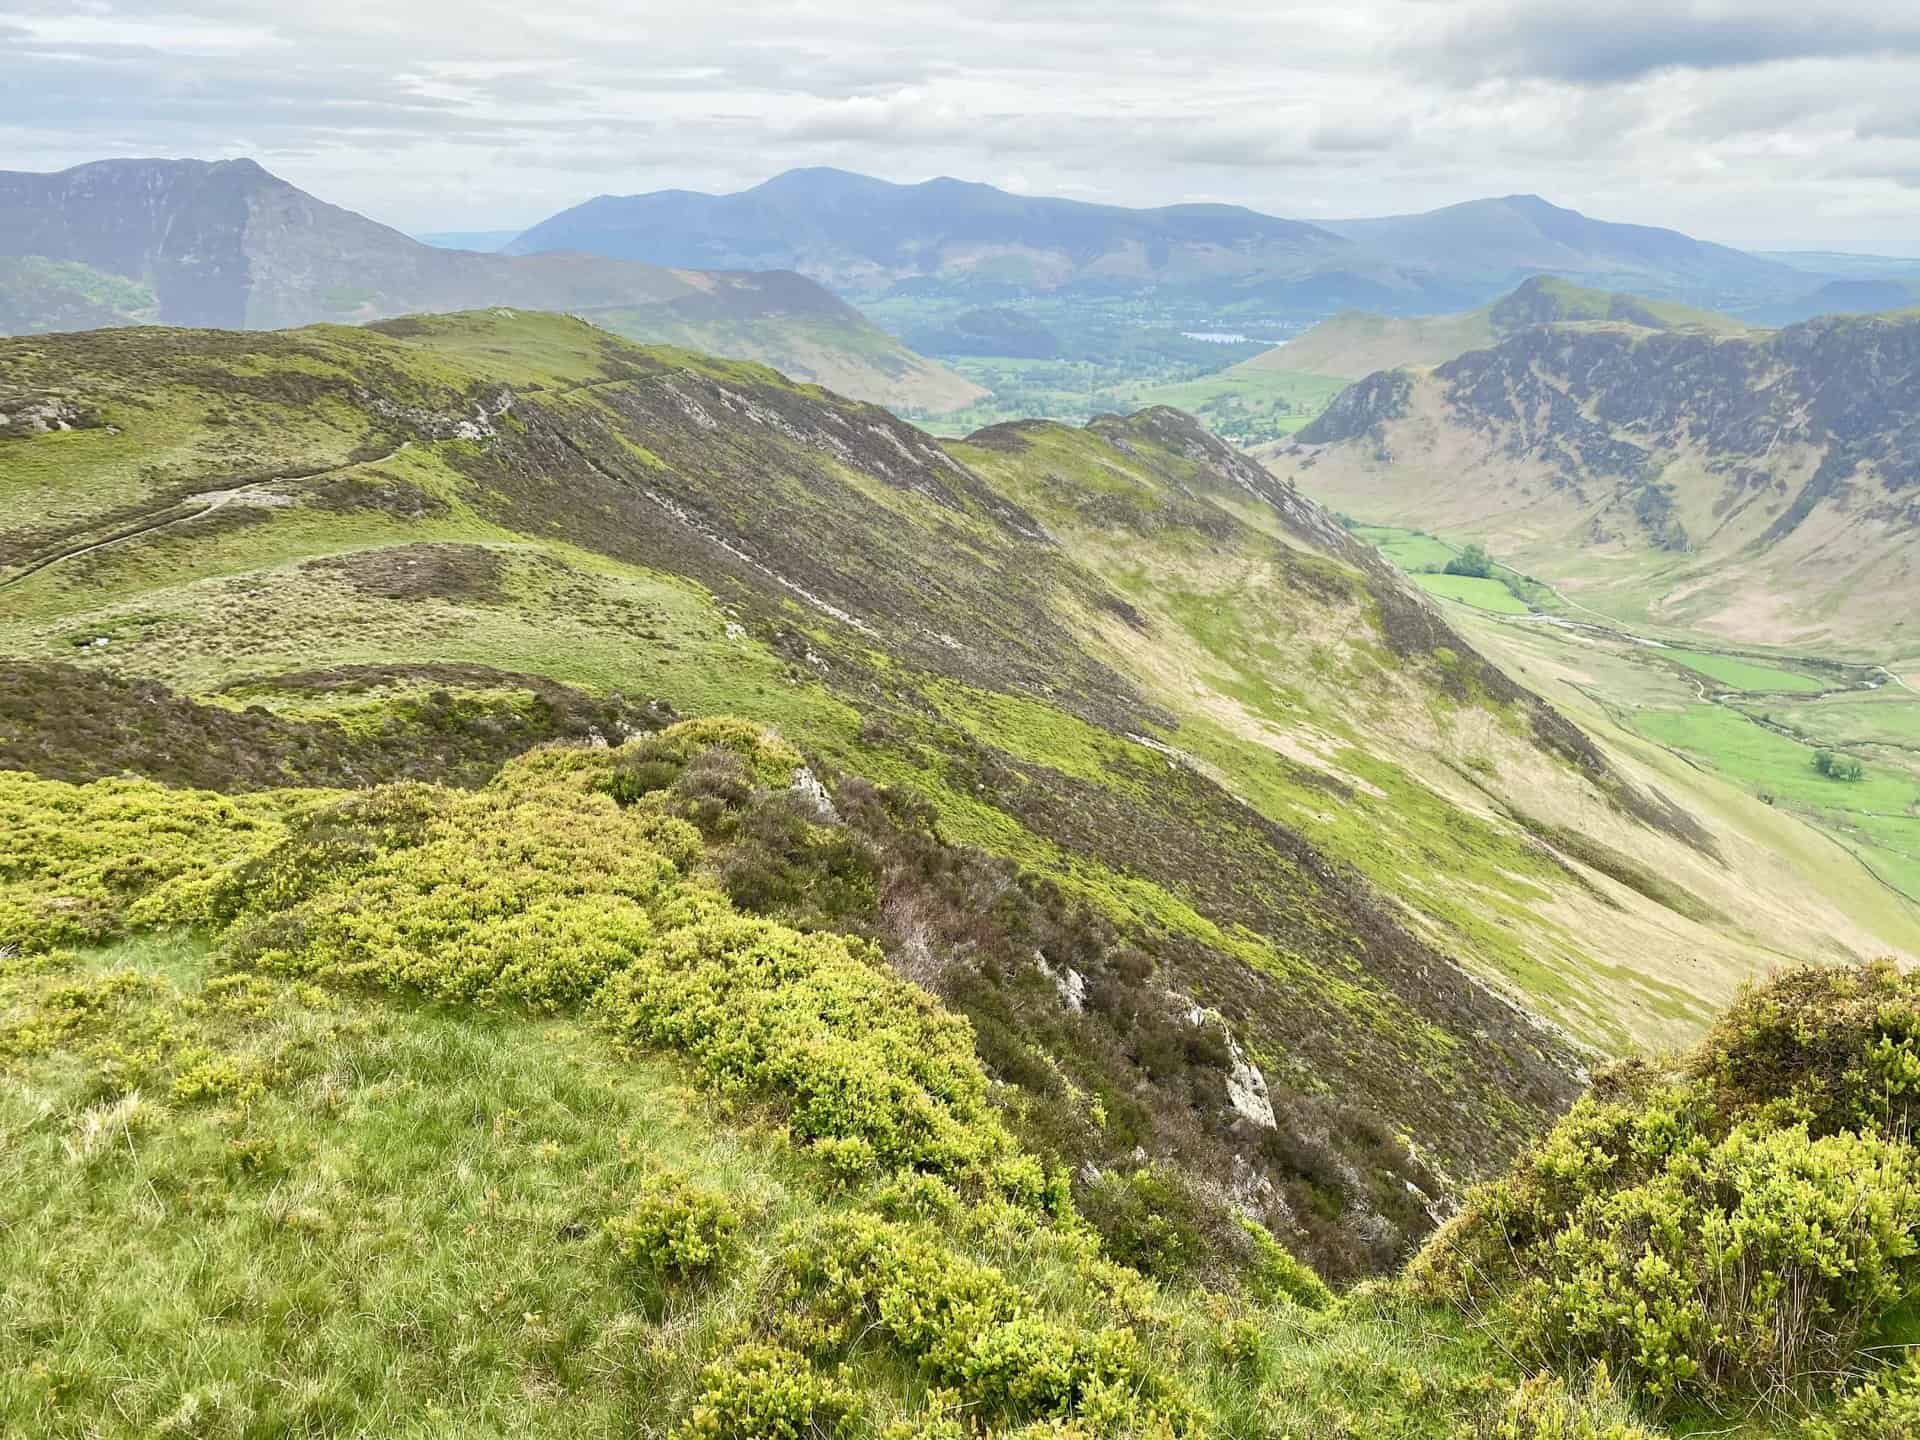 Looking back at High Crags and Scope End, with the Skiddaw and Blencathra mountain ranges in the distance.